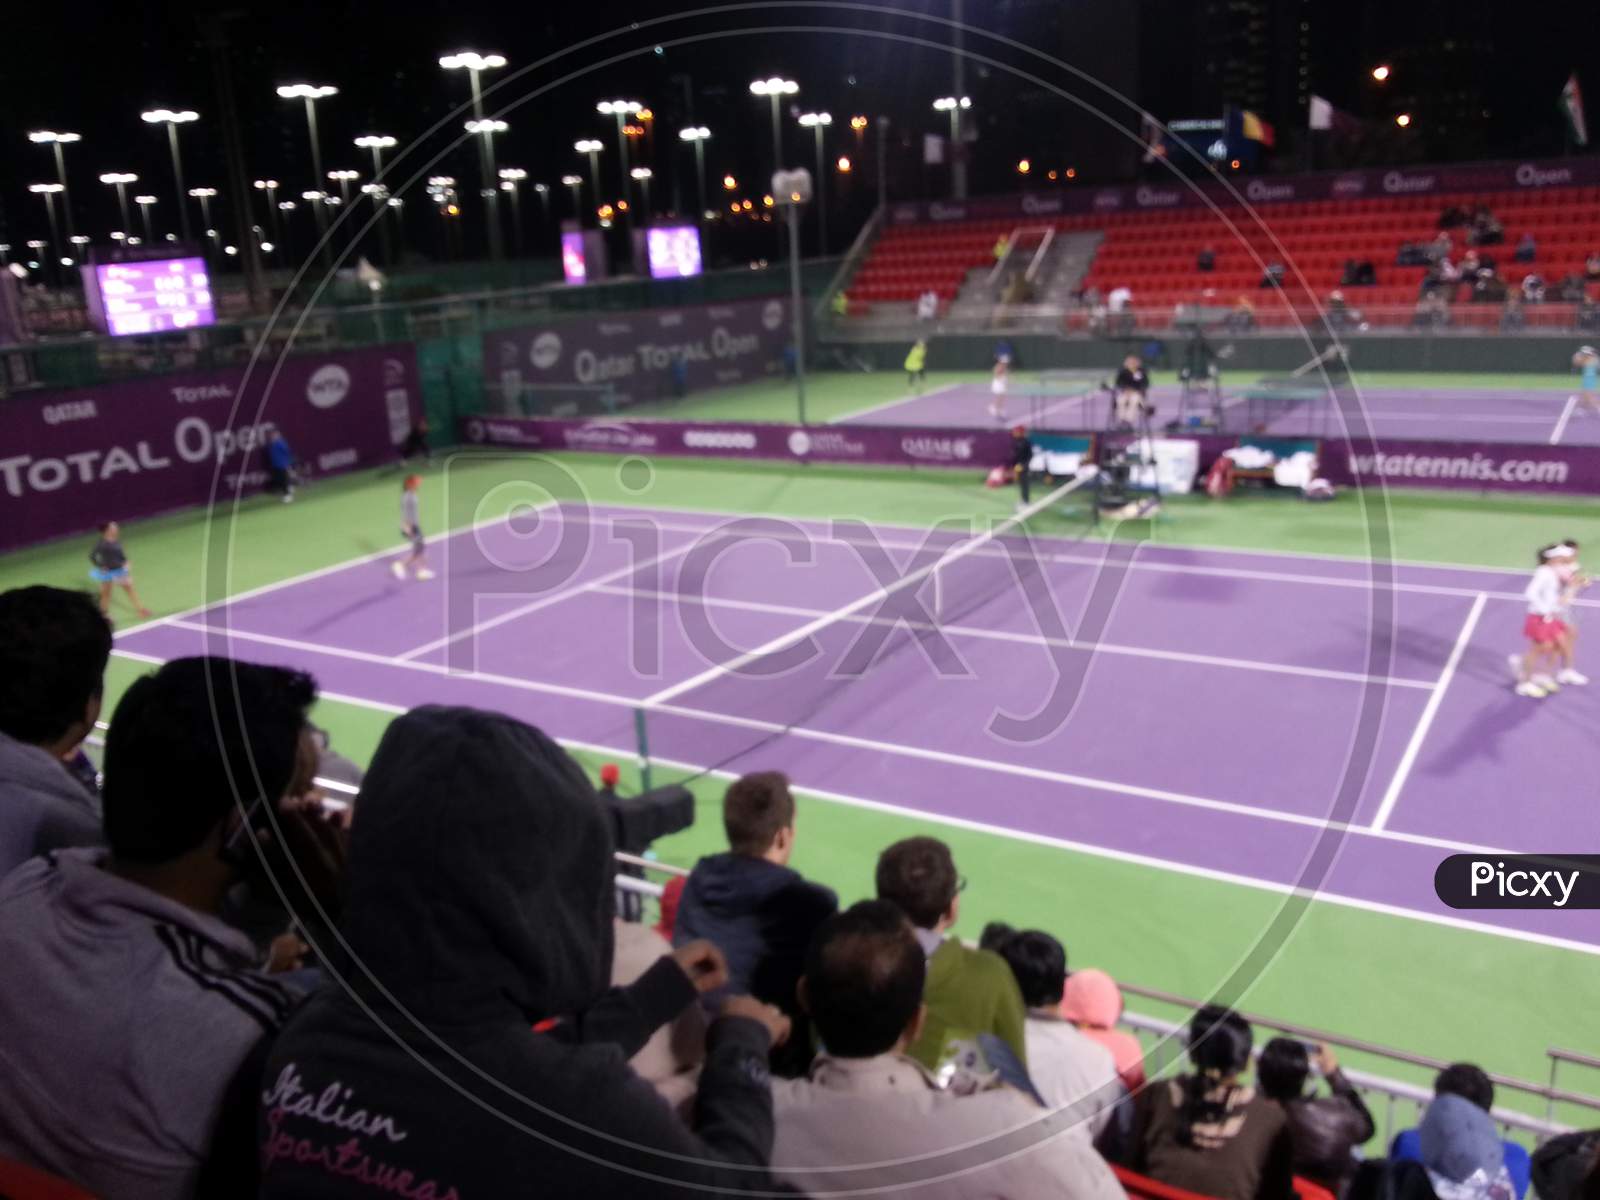 The Qatar Ladies Open, currently sponsored by Total and called the Qatar Total Open, is a women's tennis tournament held in Doha, Qatar. Held since 2001, this WTA Tour event was a Tier I-tournament in 2008, and was played on outdoor hardcourts.